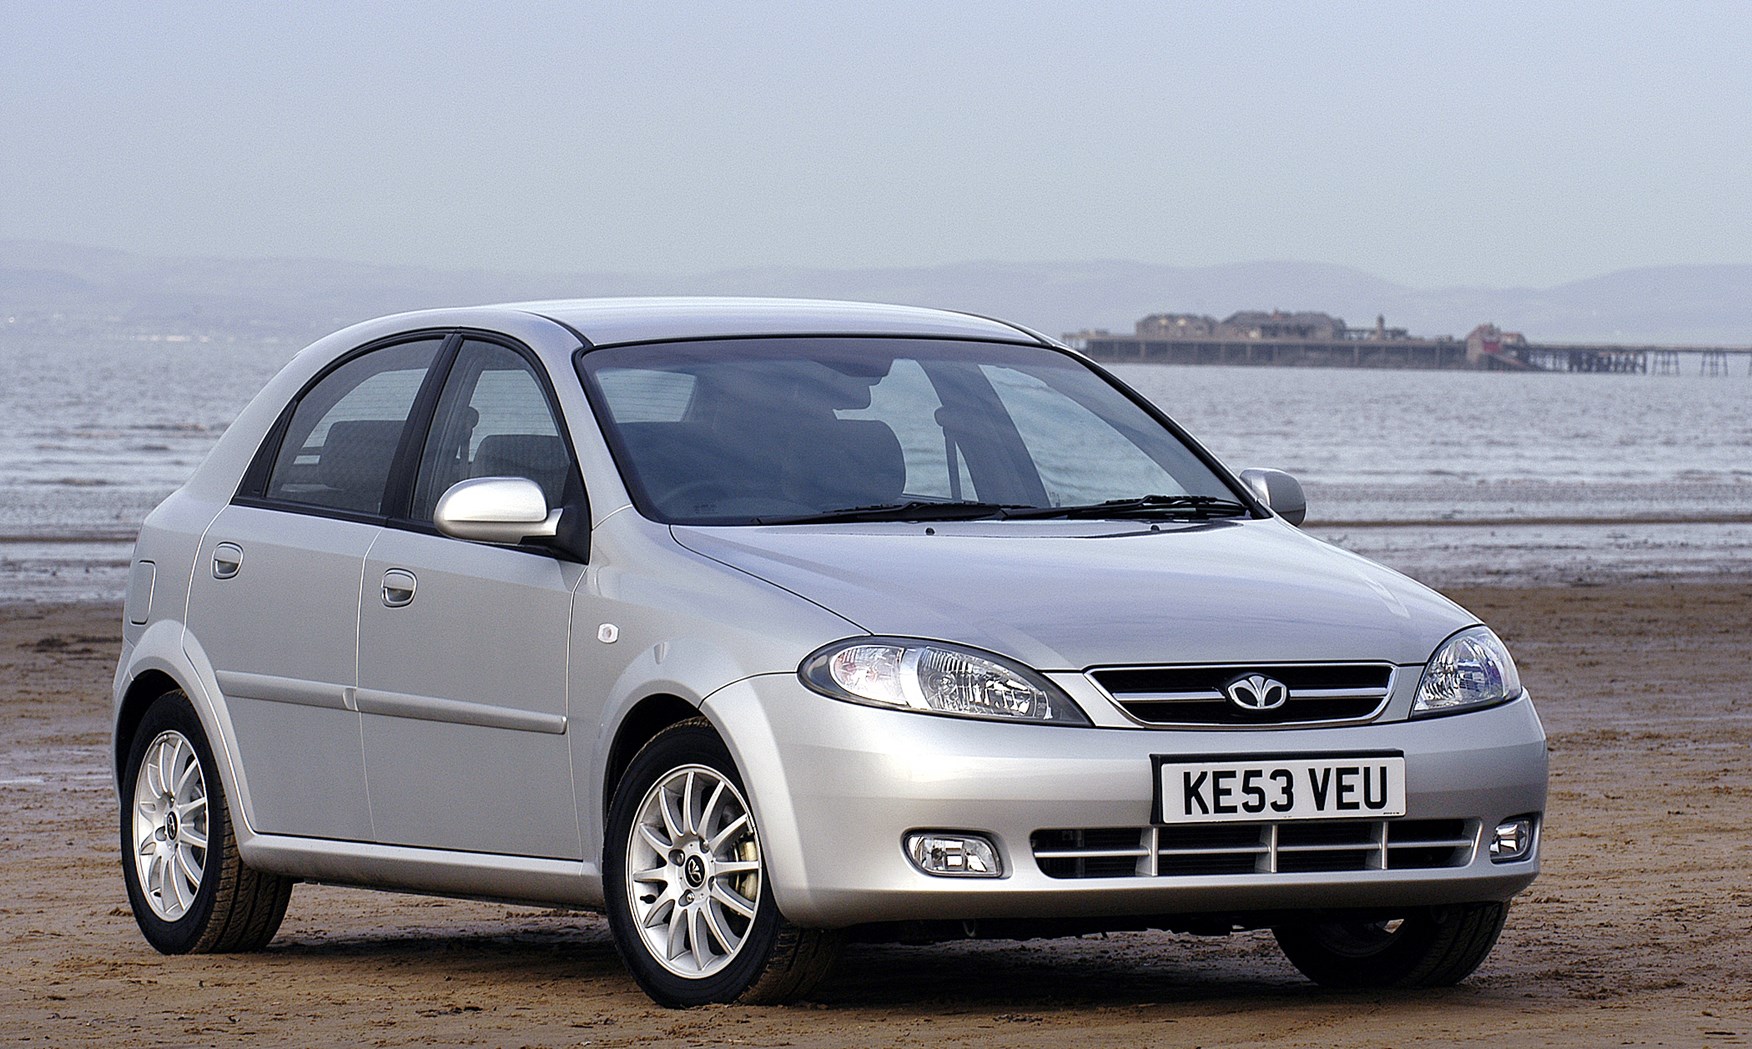 Daewoo Lacetti Hatchback Review (2004 2005) Parkers